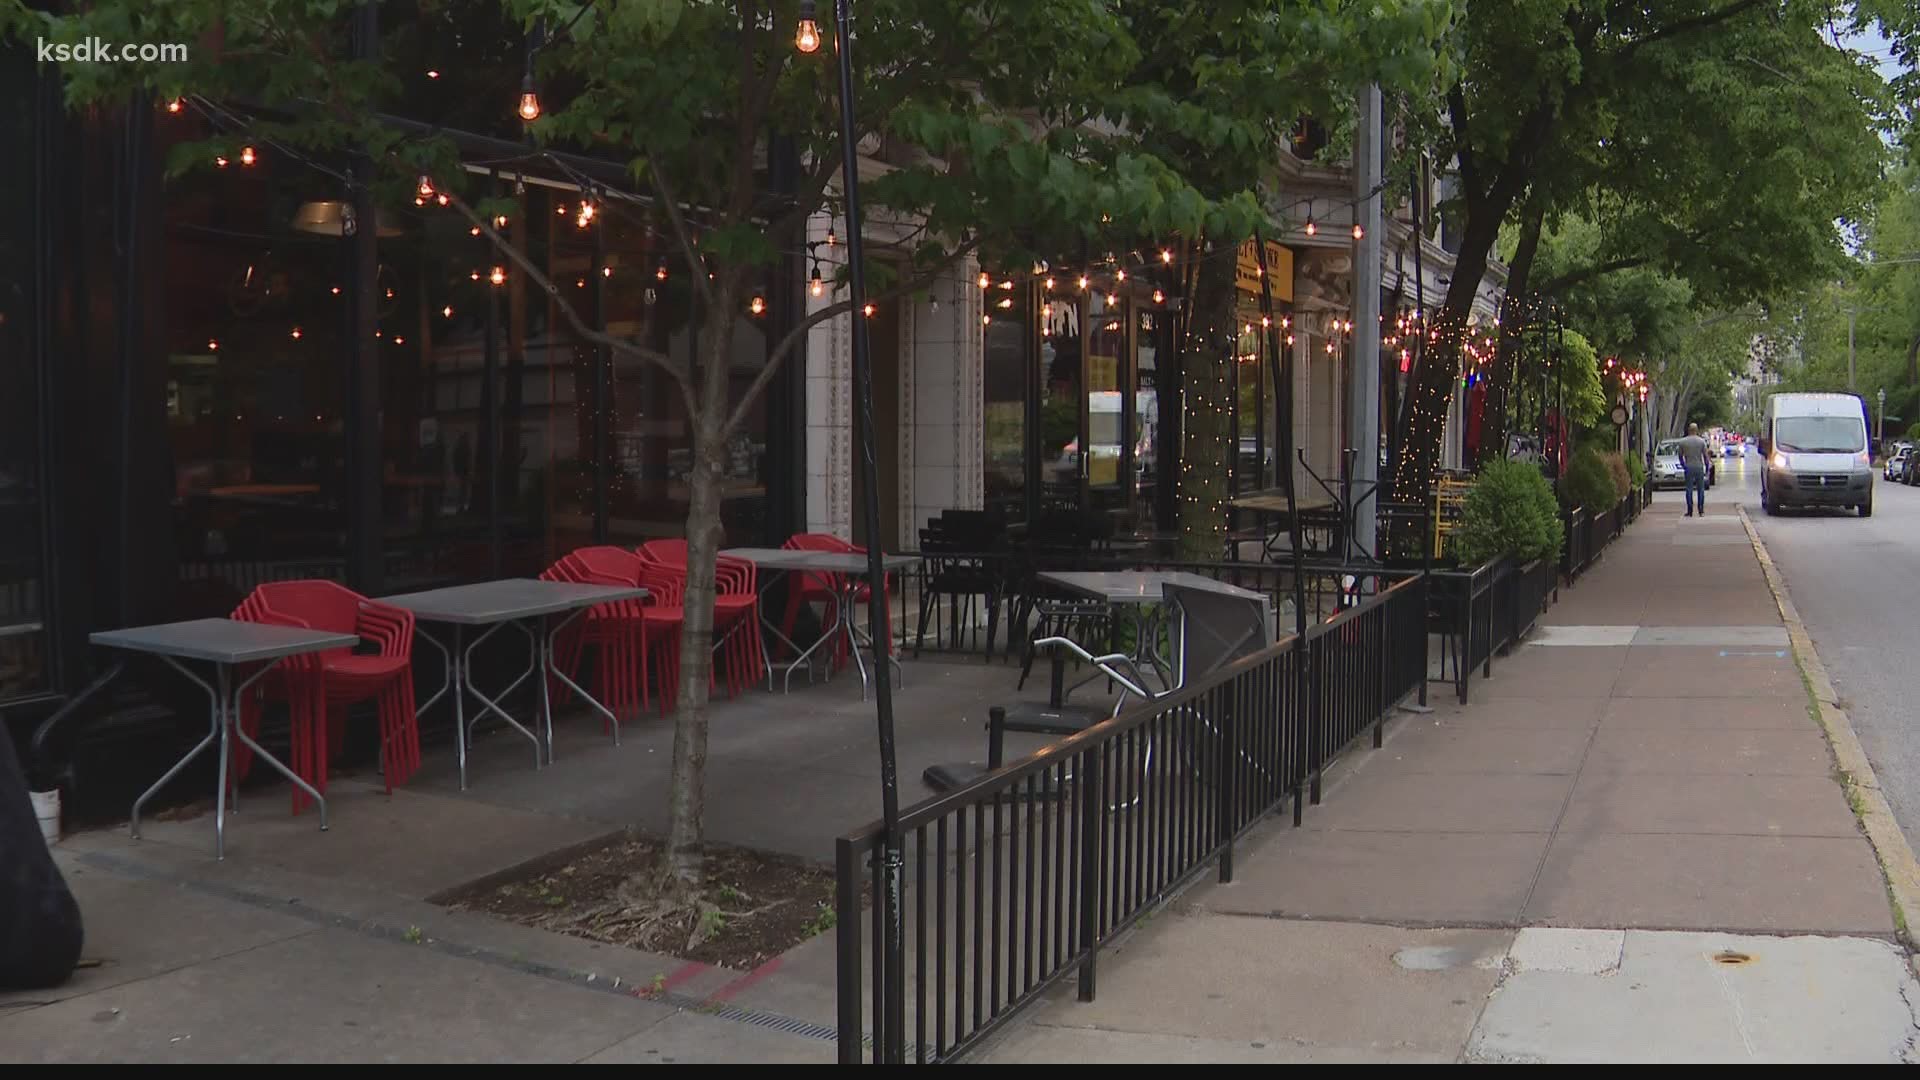 Dining in the streets? It could happen when restaurants reopen in Missouri.